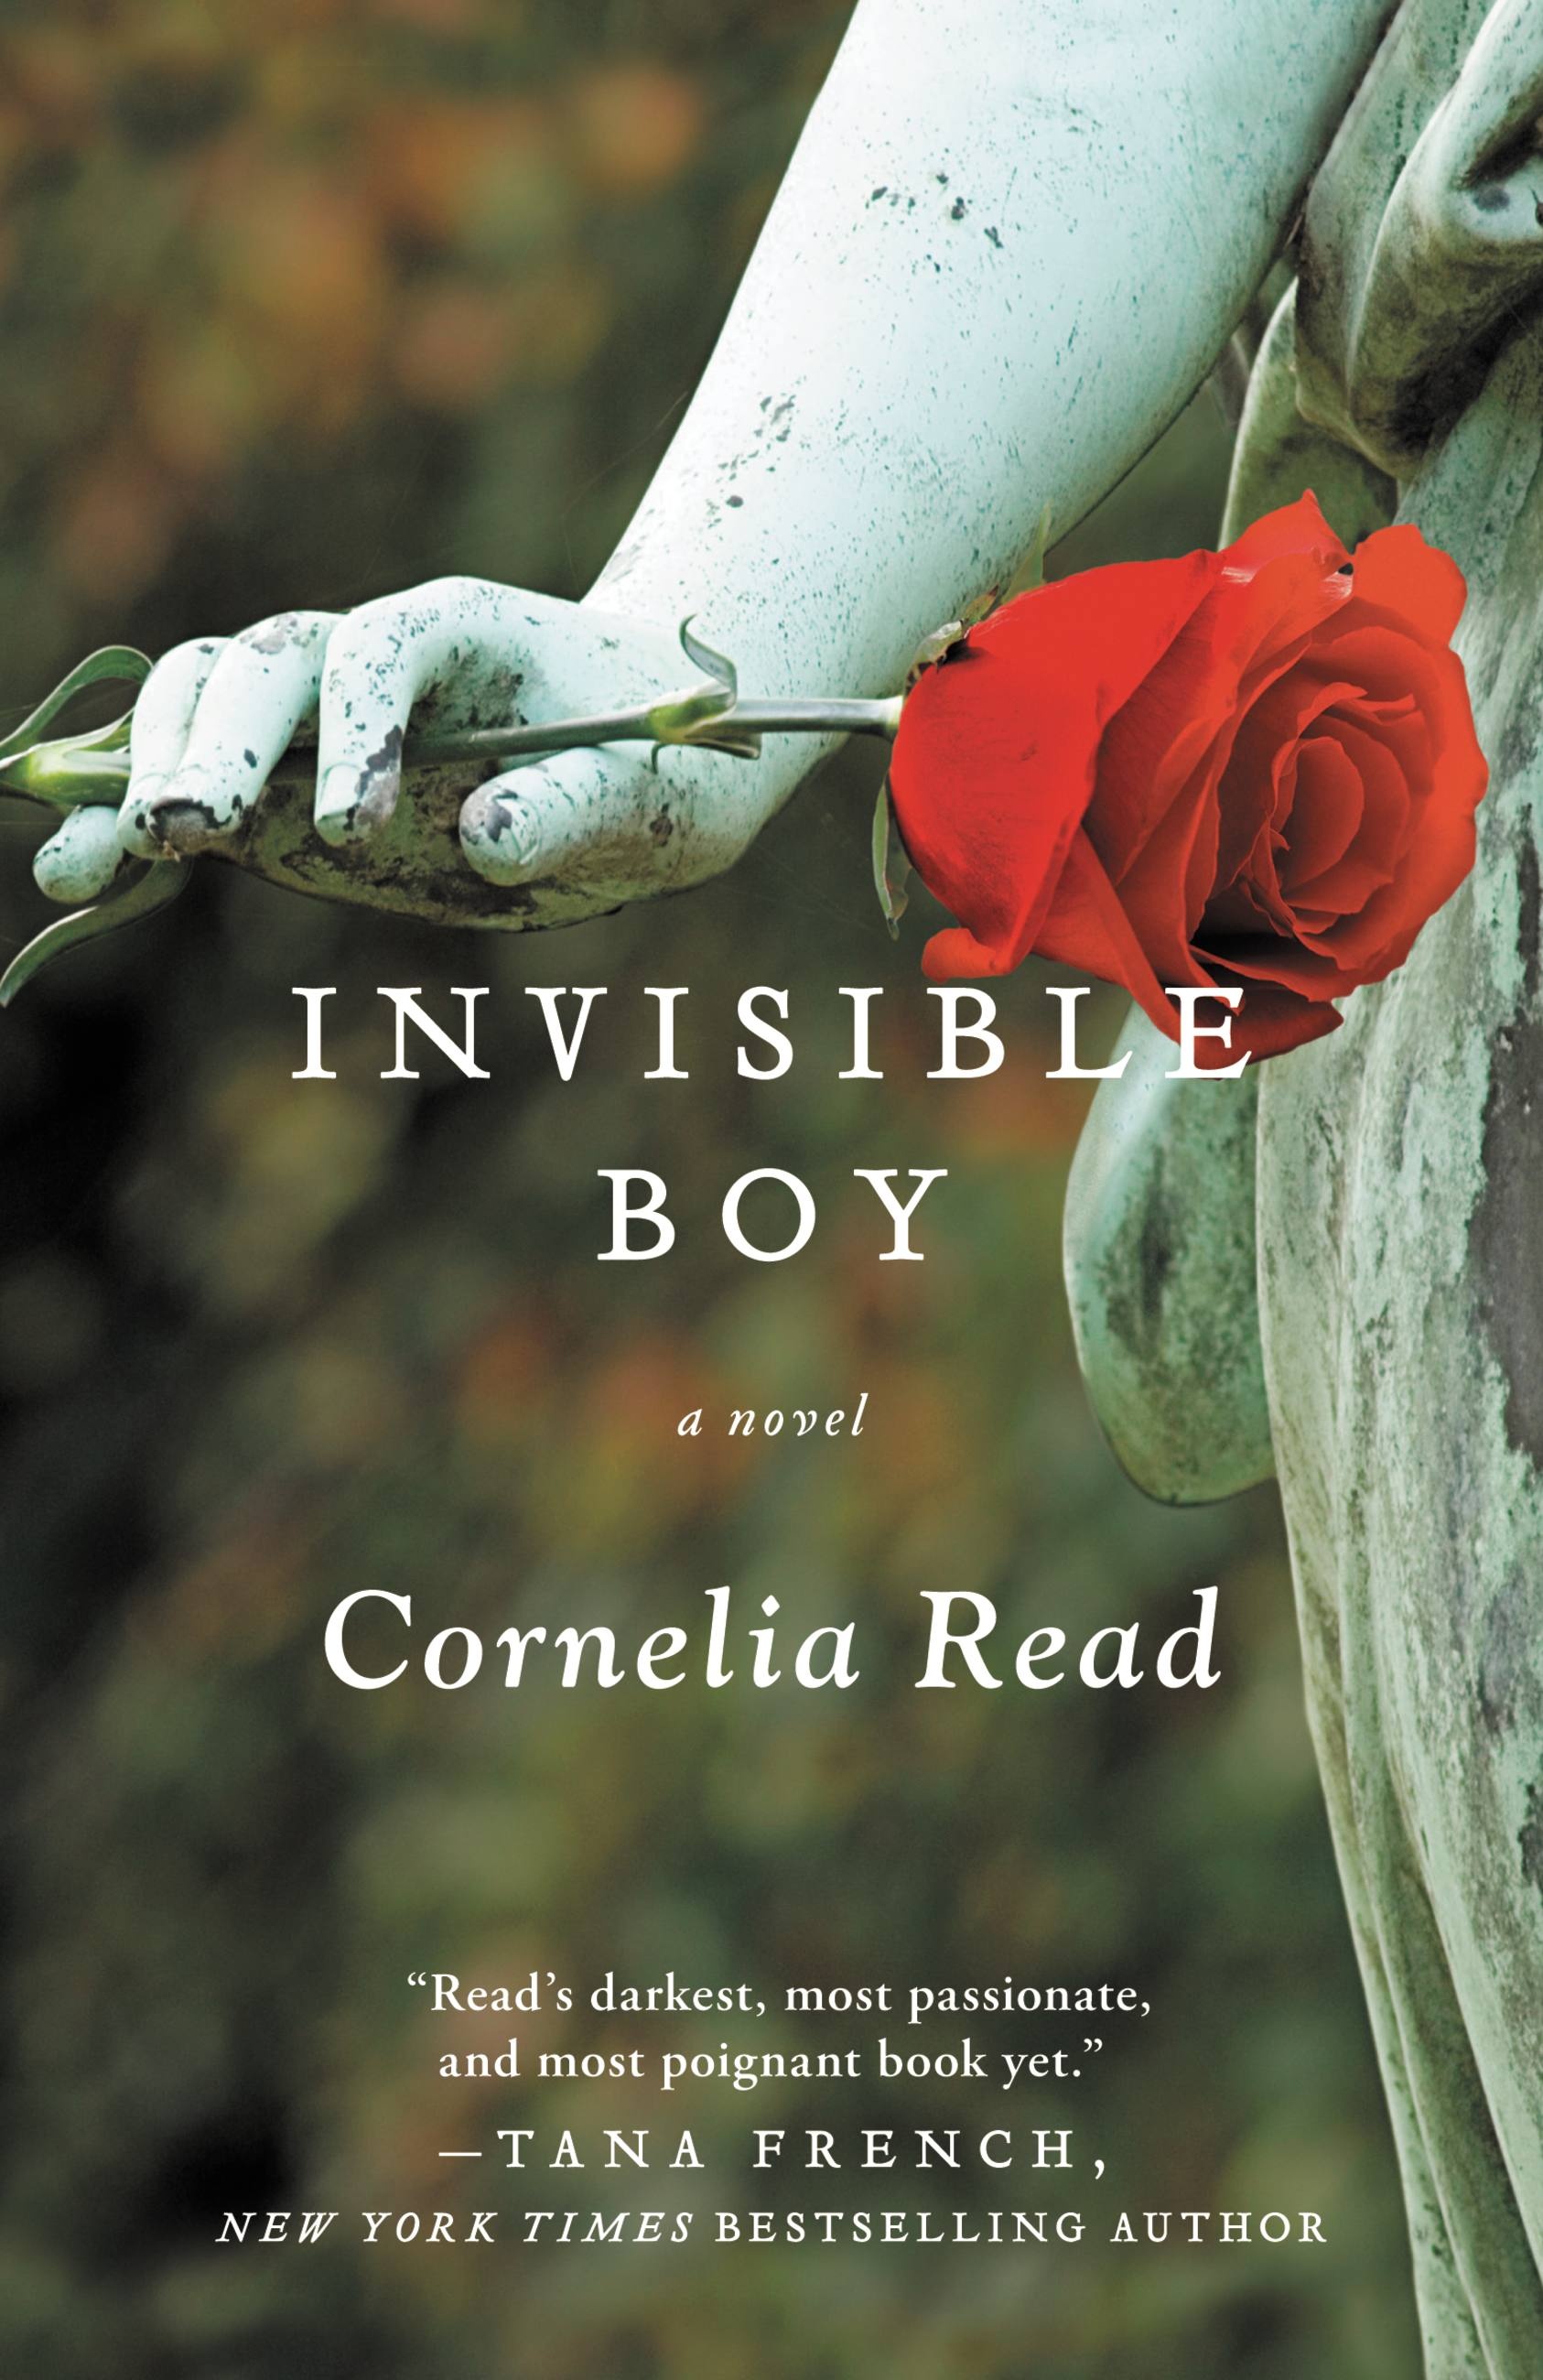 This book yet. The Invisible boy. The Invincible boy.